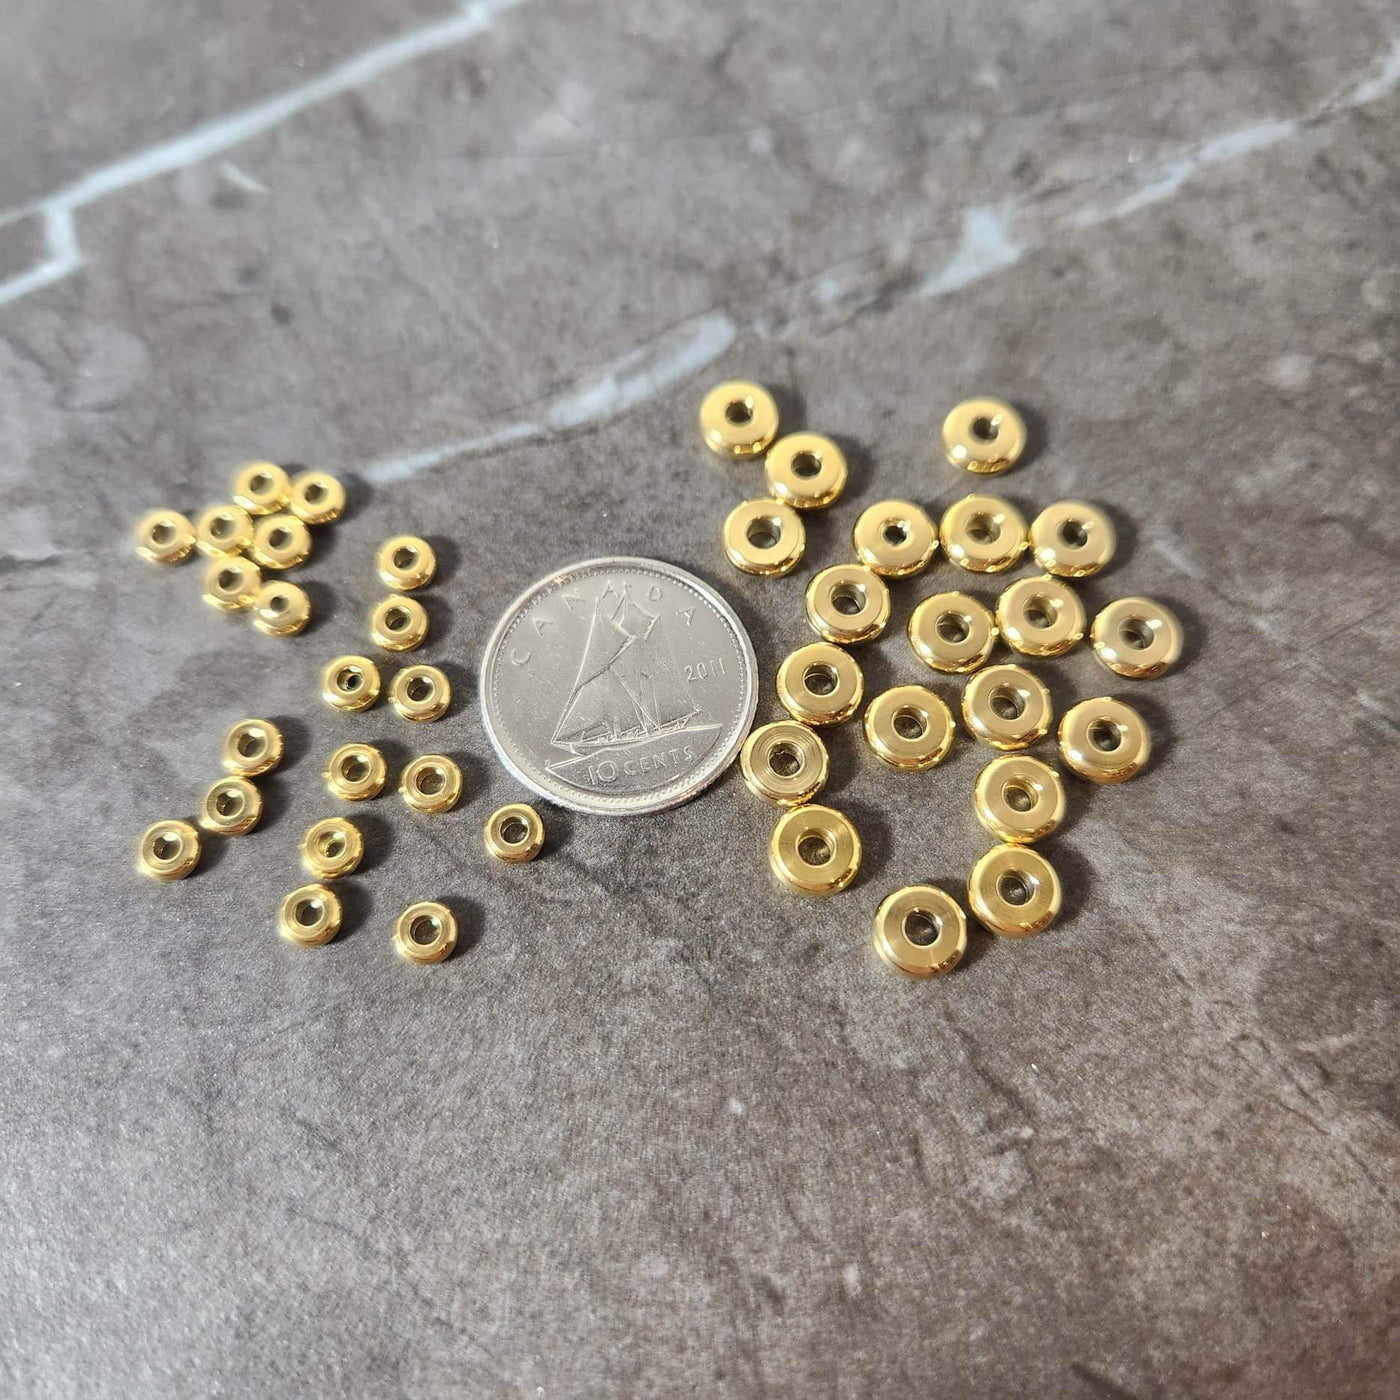 Set of stainless steel gold washer spacers